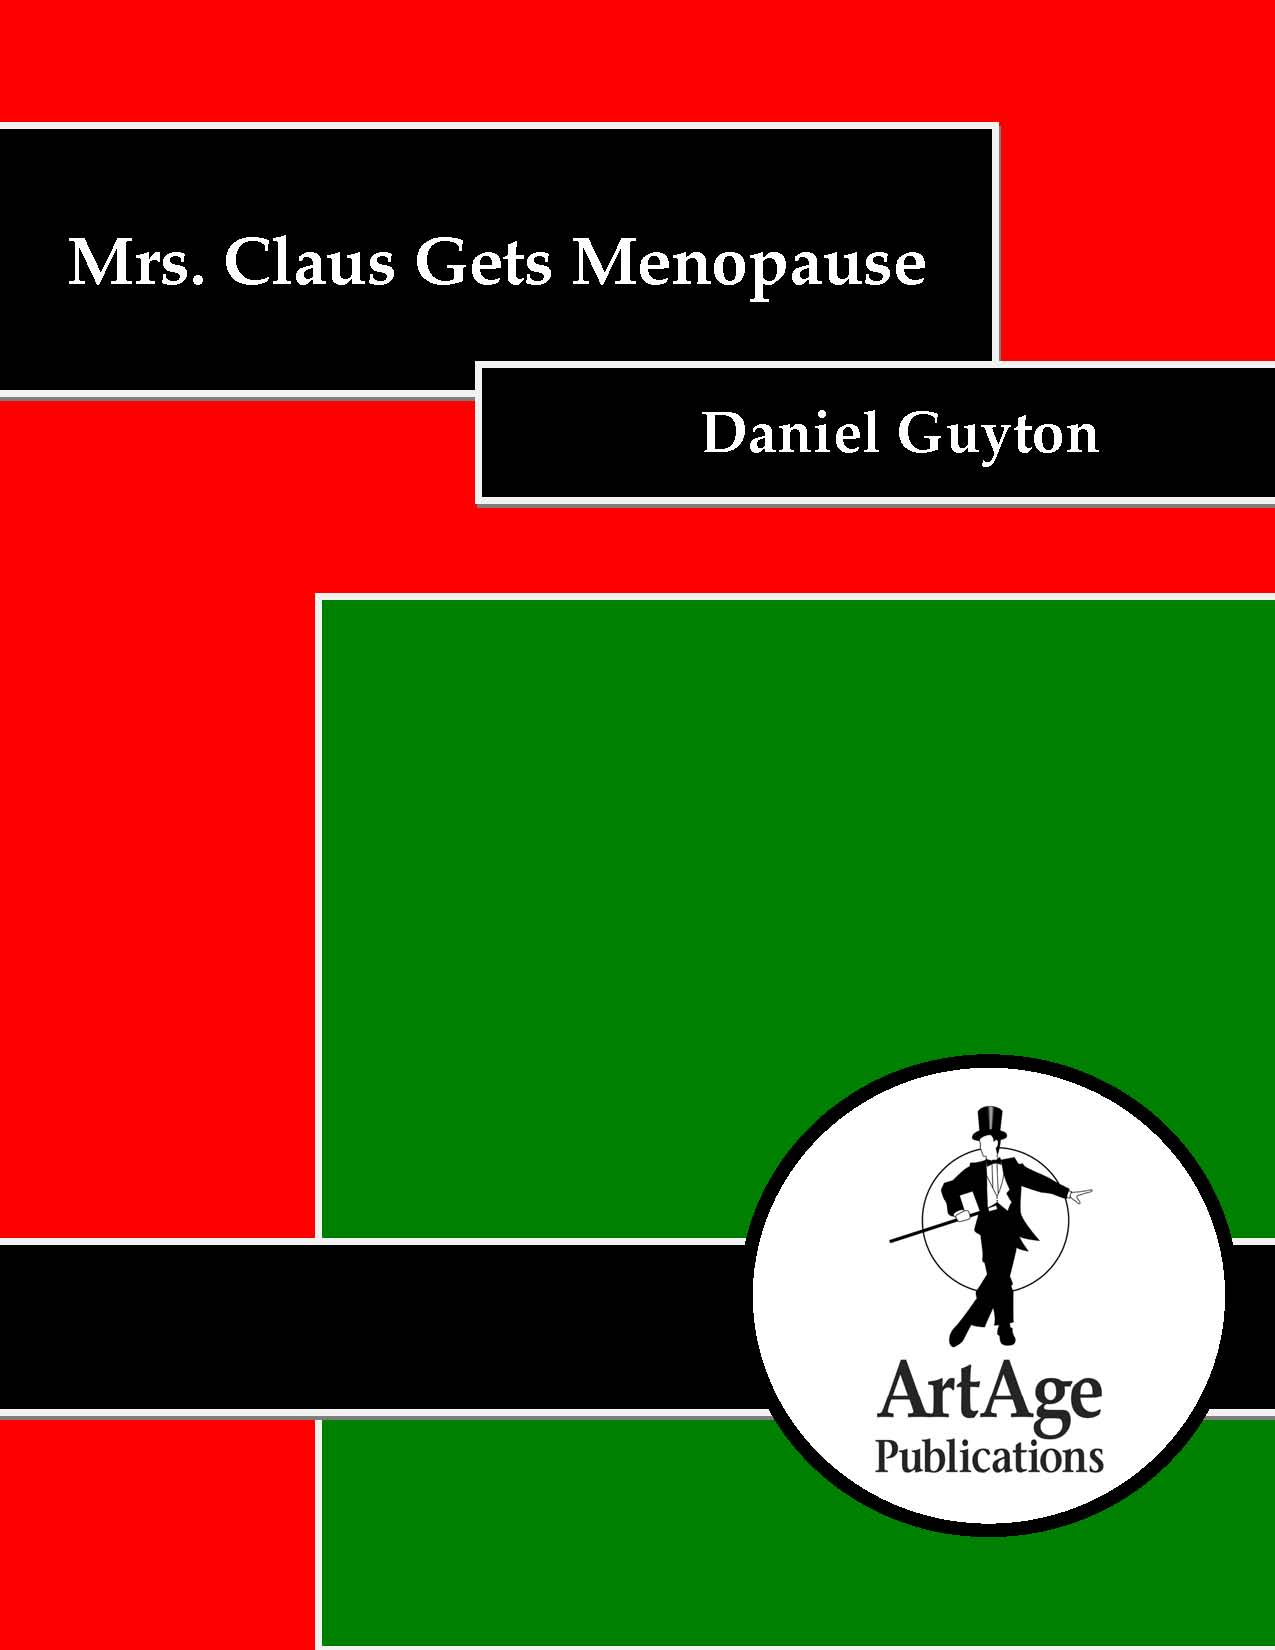 Mrs. Claus Gets Menopause by Daniel Guyton